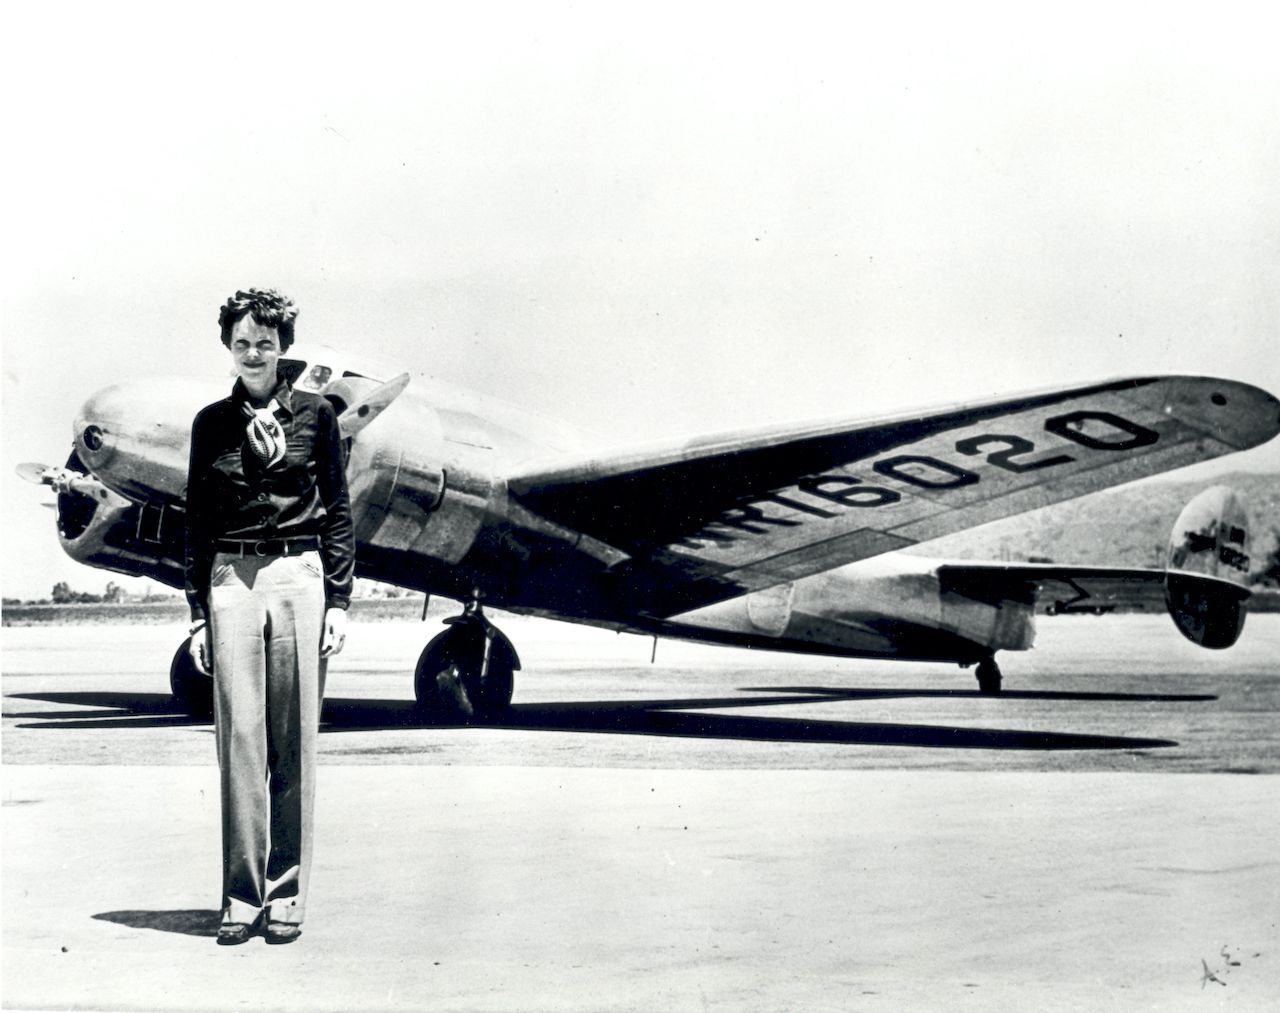 Amelia Earhart and the Lockwood Electric a10-E in which she disappeared in July 1937. (Photo credit: Amelia Earhart Hangar Museum)